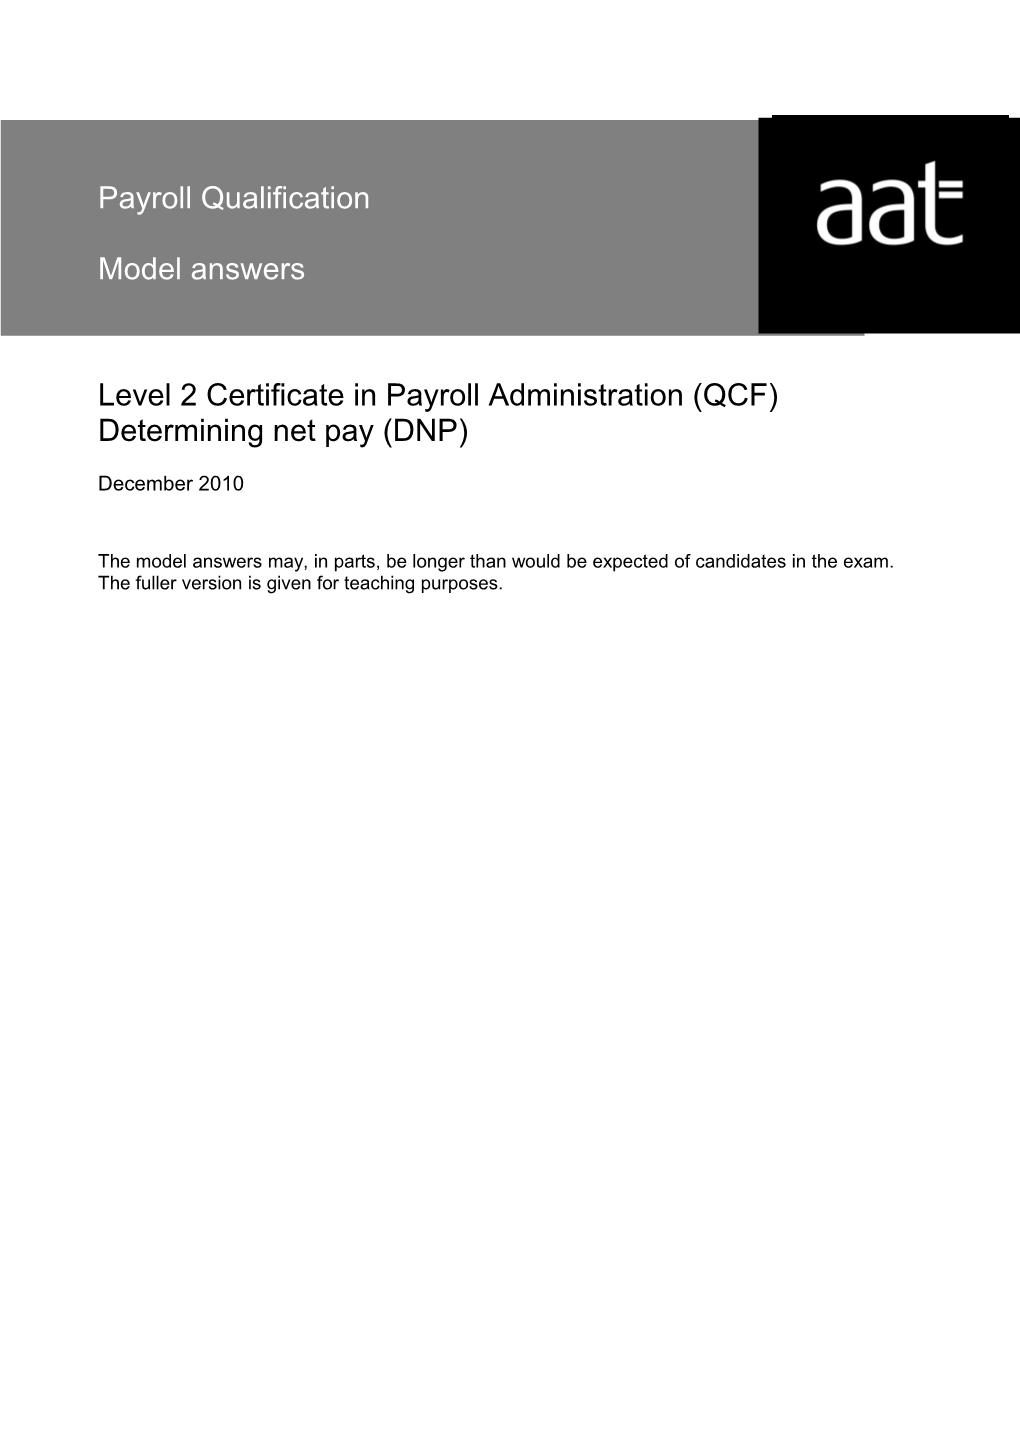 Nvq/Svq Level 2 in Payroll Administration